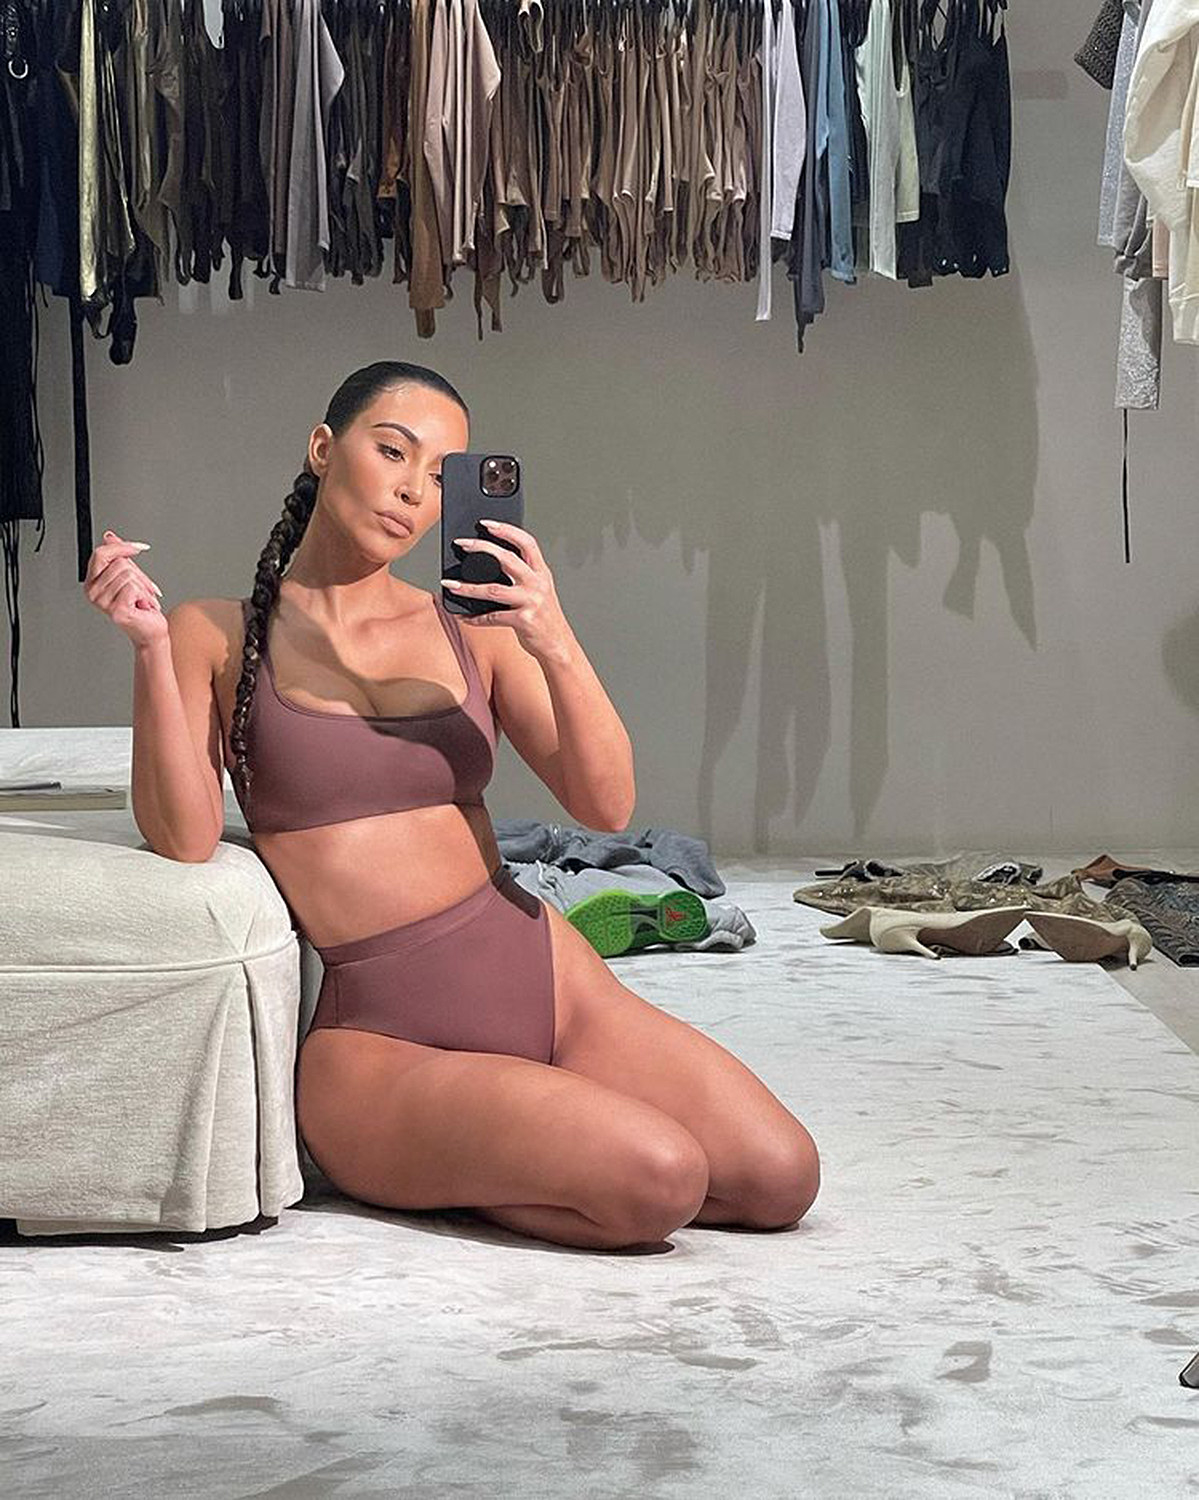 Kim taking a picture of herself wearing shapewear with her hair in a braided ponytail